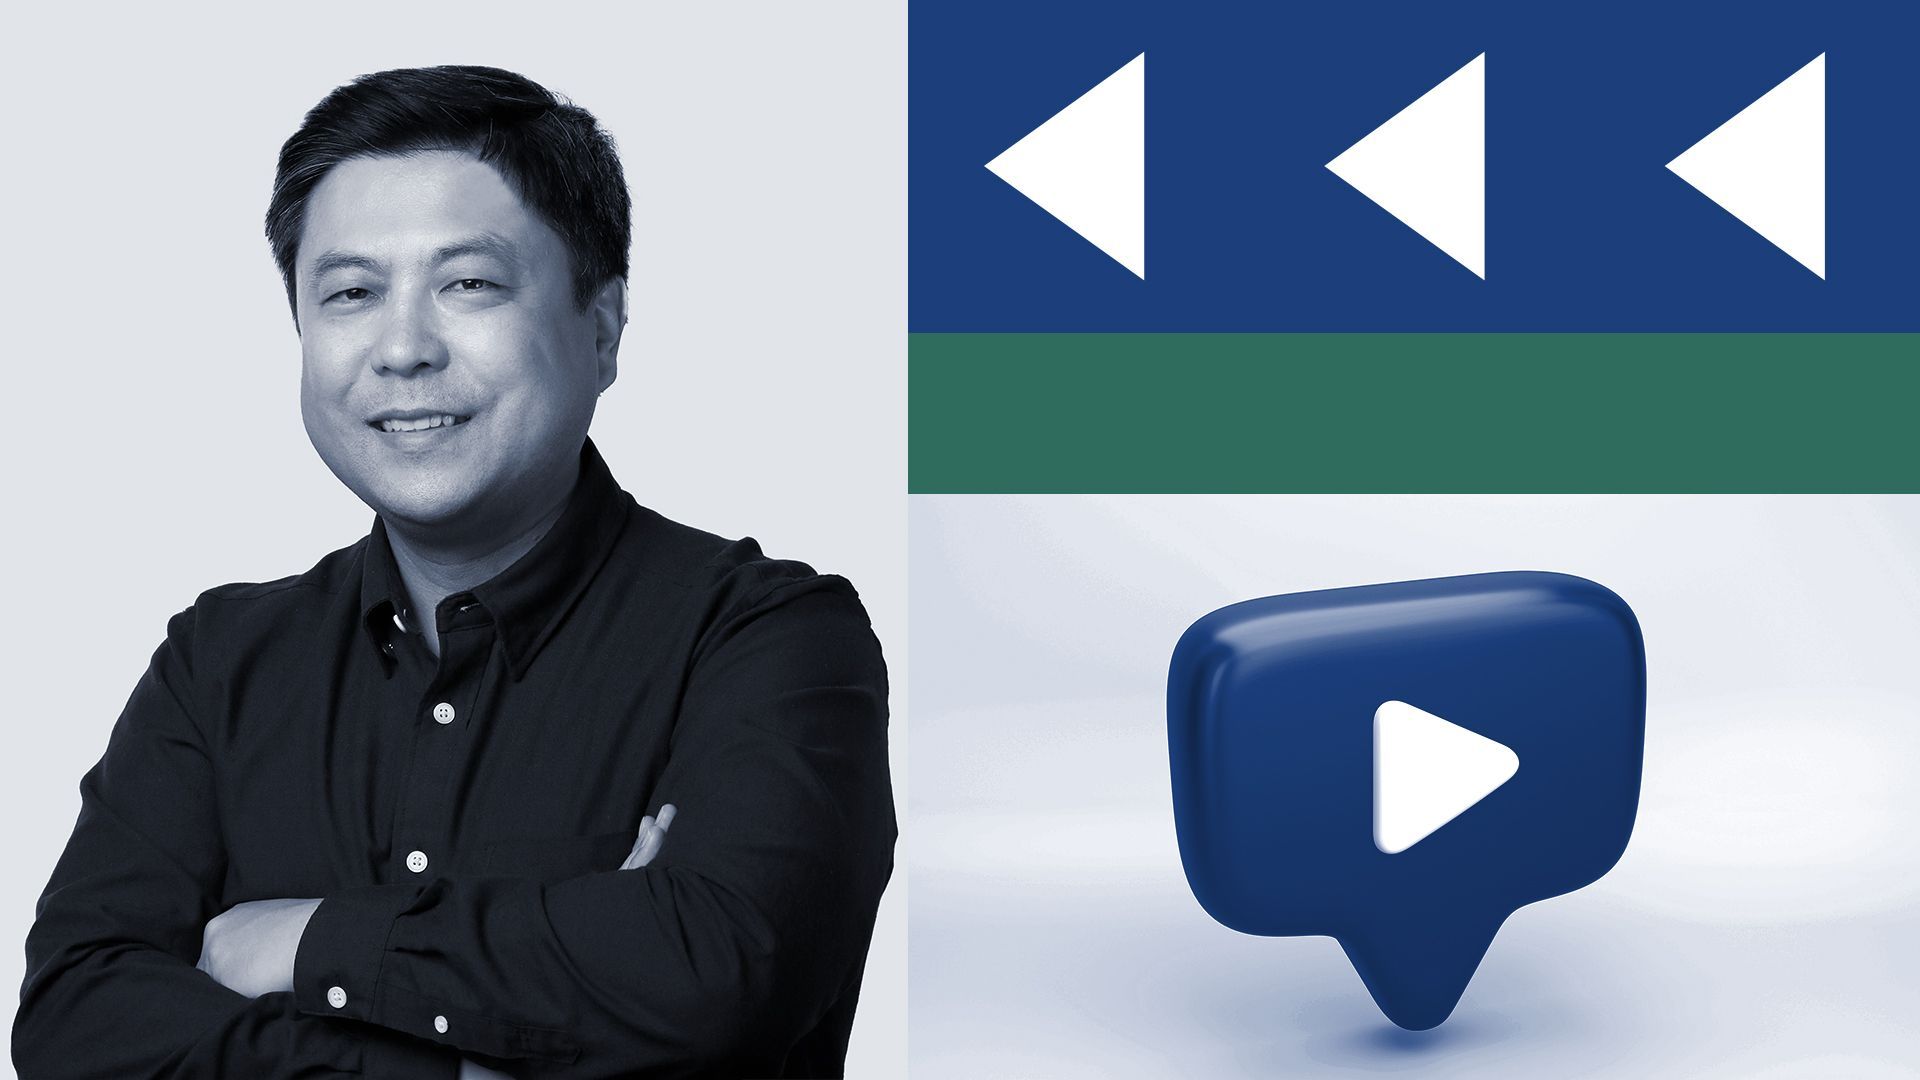 Photo illustration of Ikkjin Ahn next to abstract shapes and a 3D play button.